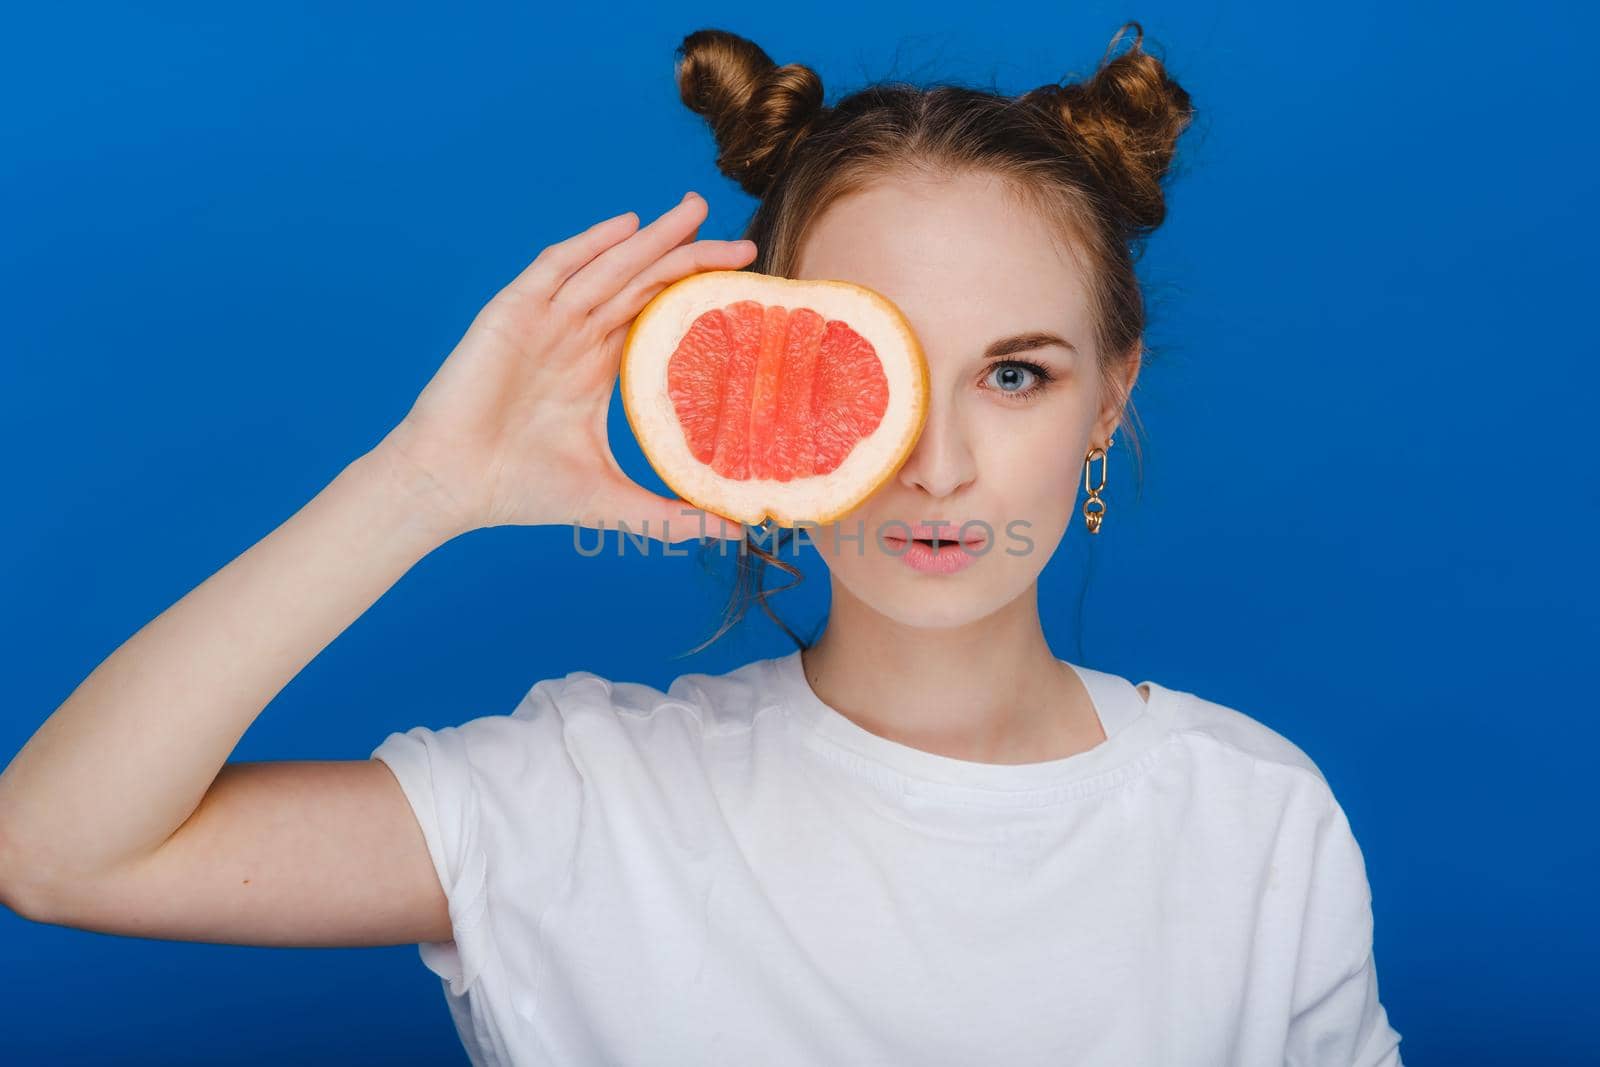 Surprised, the laughing girl holds the grapefruit like ears. Vegan lifestyle. Smiling woman , eating concept.Diet organic , weight loss and healthy food. Smoothies and fresh juice